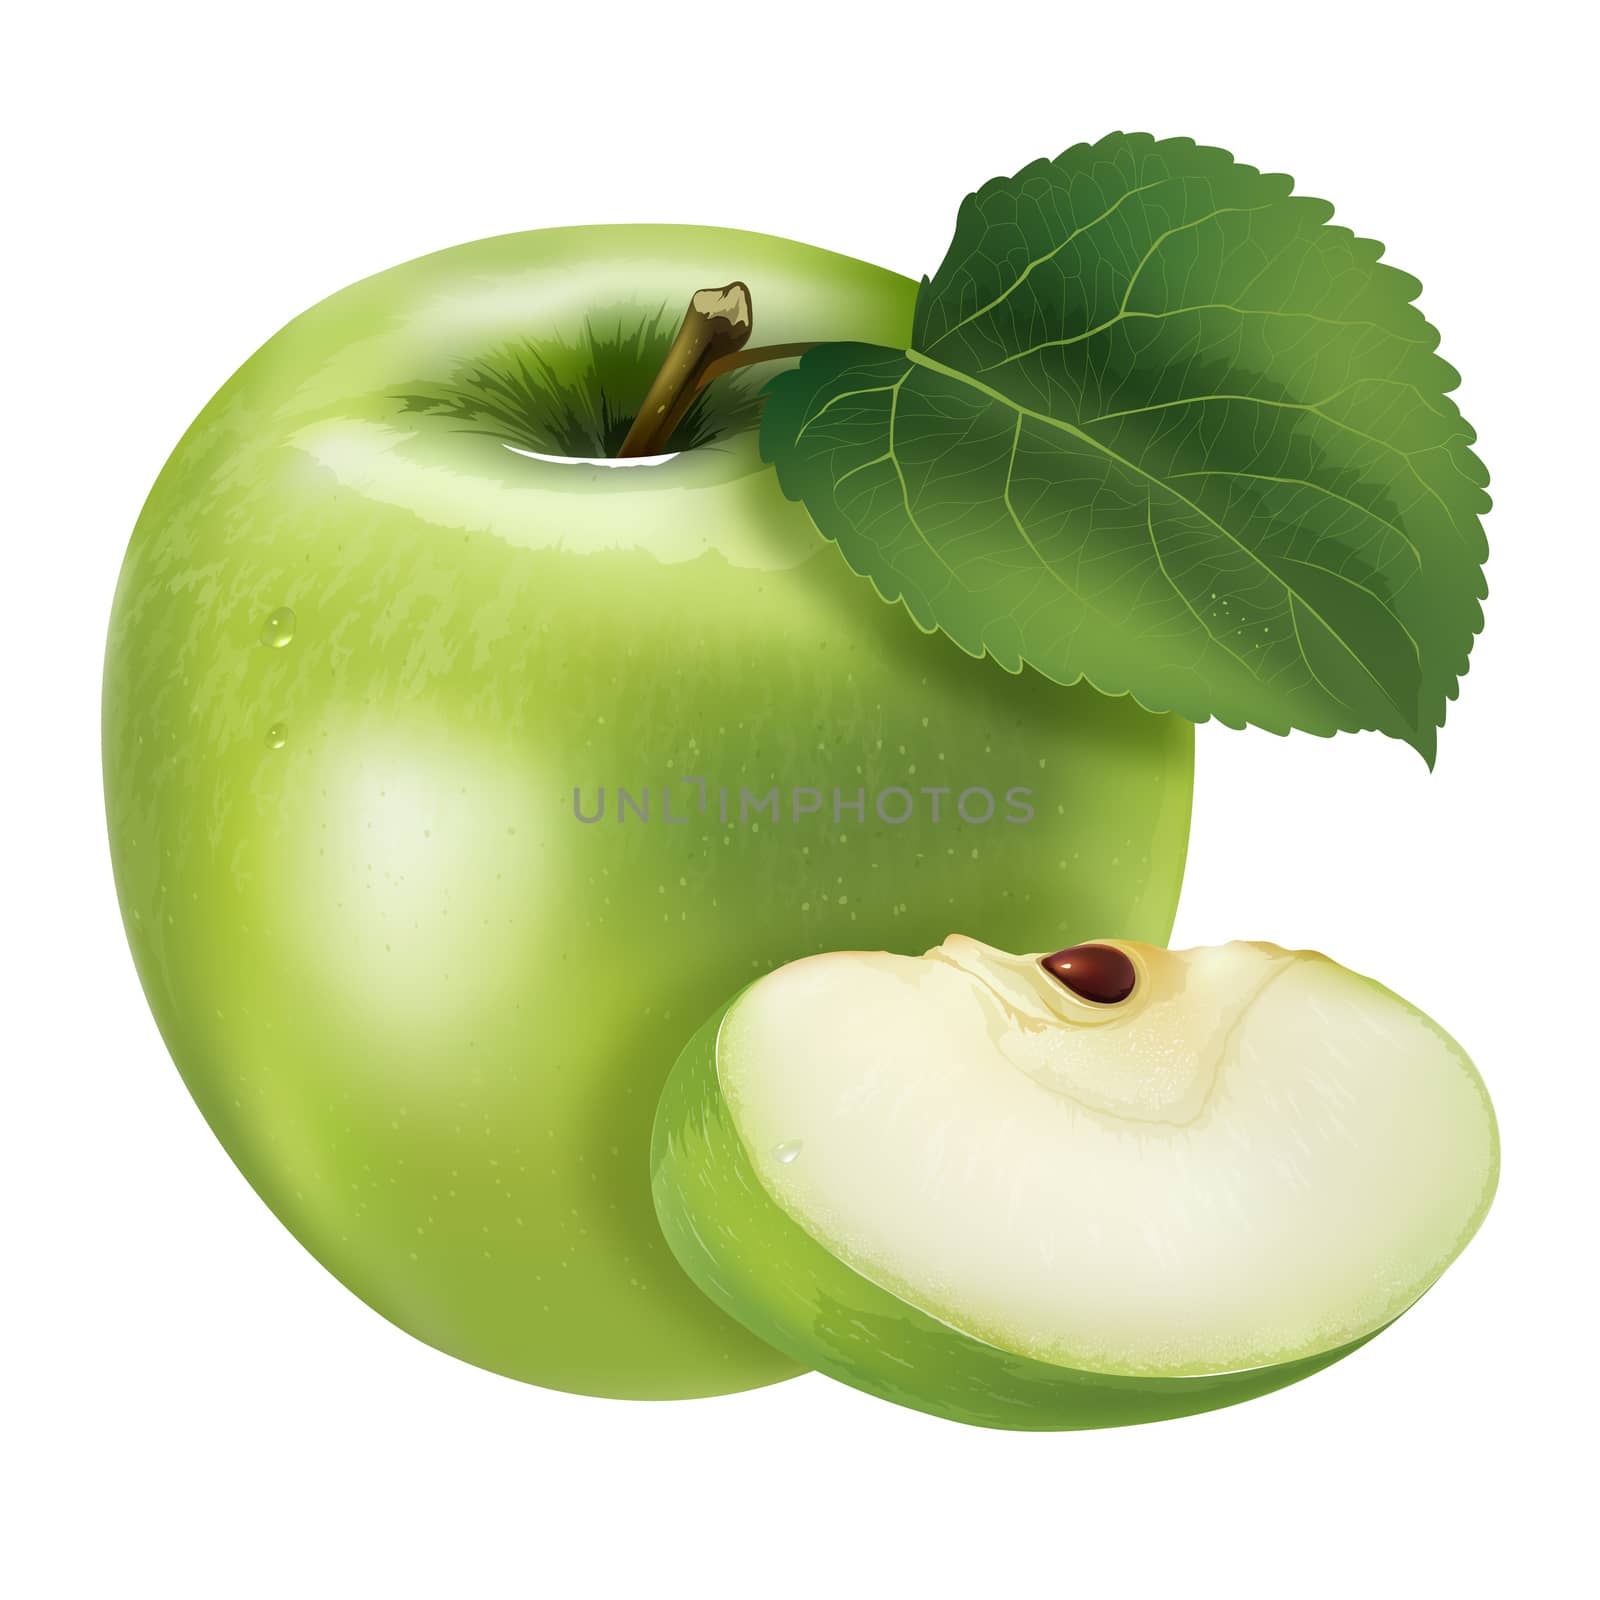 Green apple with leaves. Isolated illustration on white background.